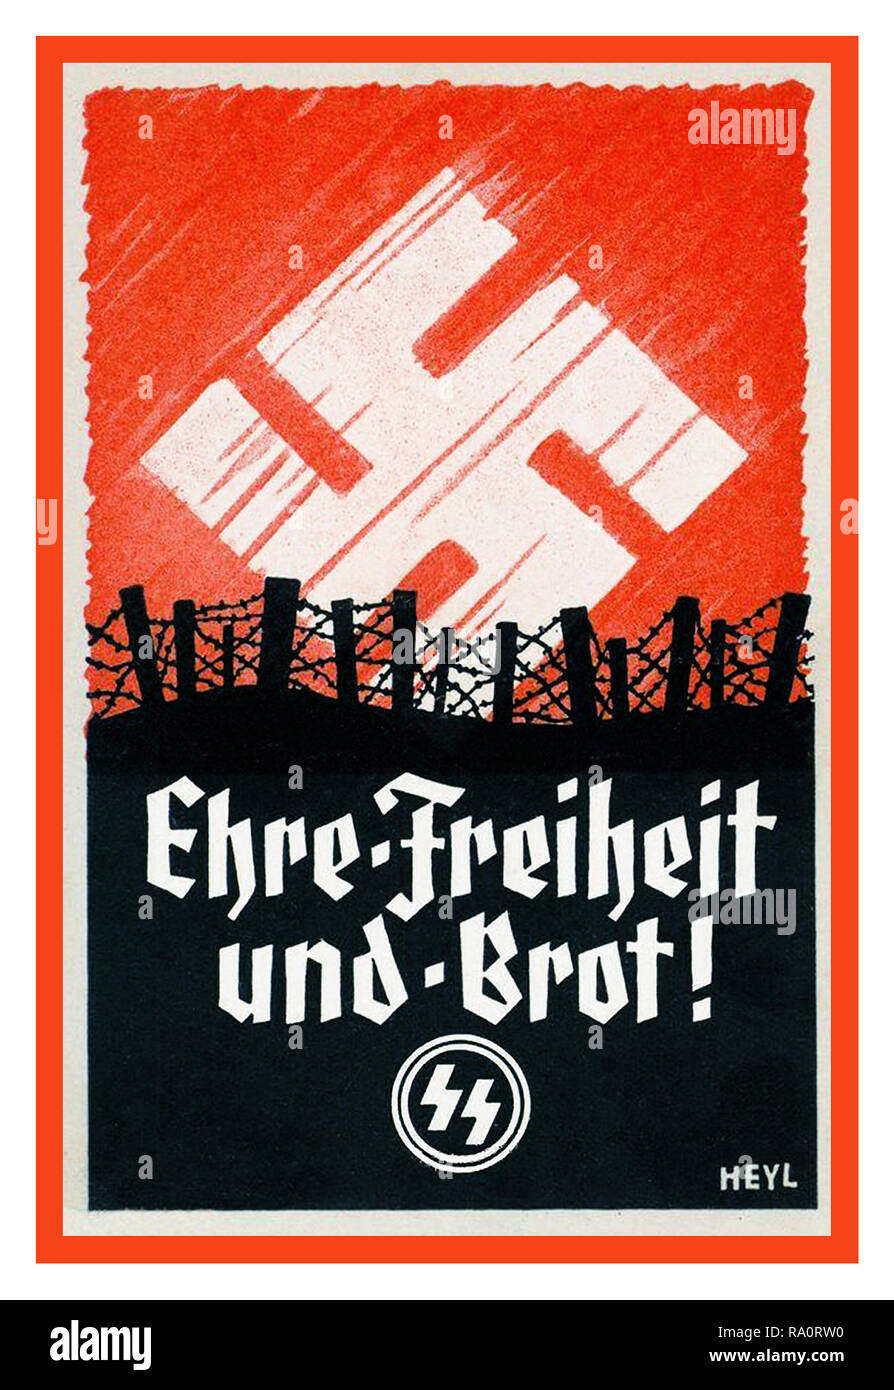 Vintage WW2 Nazi Germany SS Army Propaganda Recruitment Poster for the Waffen SS  "Honour Freedom and Bread"  EHRE, FREIHEIT, und, BROT !  in a battlefield situation with Nazi Swastika as an emblematic sunrise Stock Photo